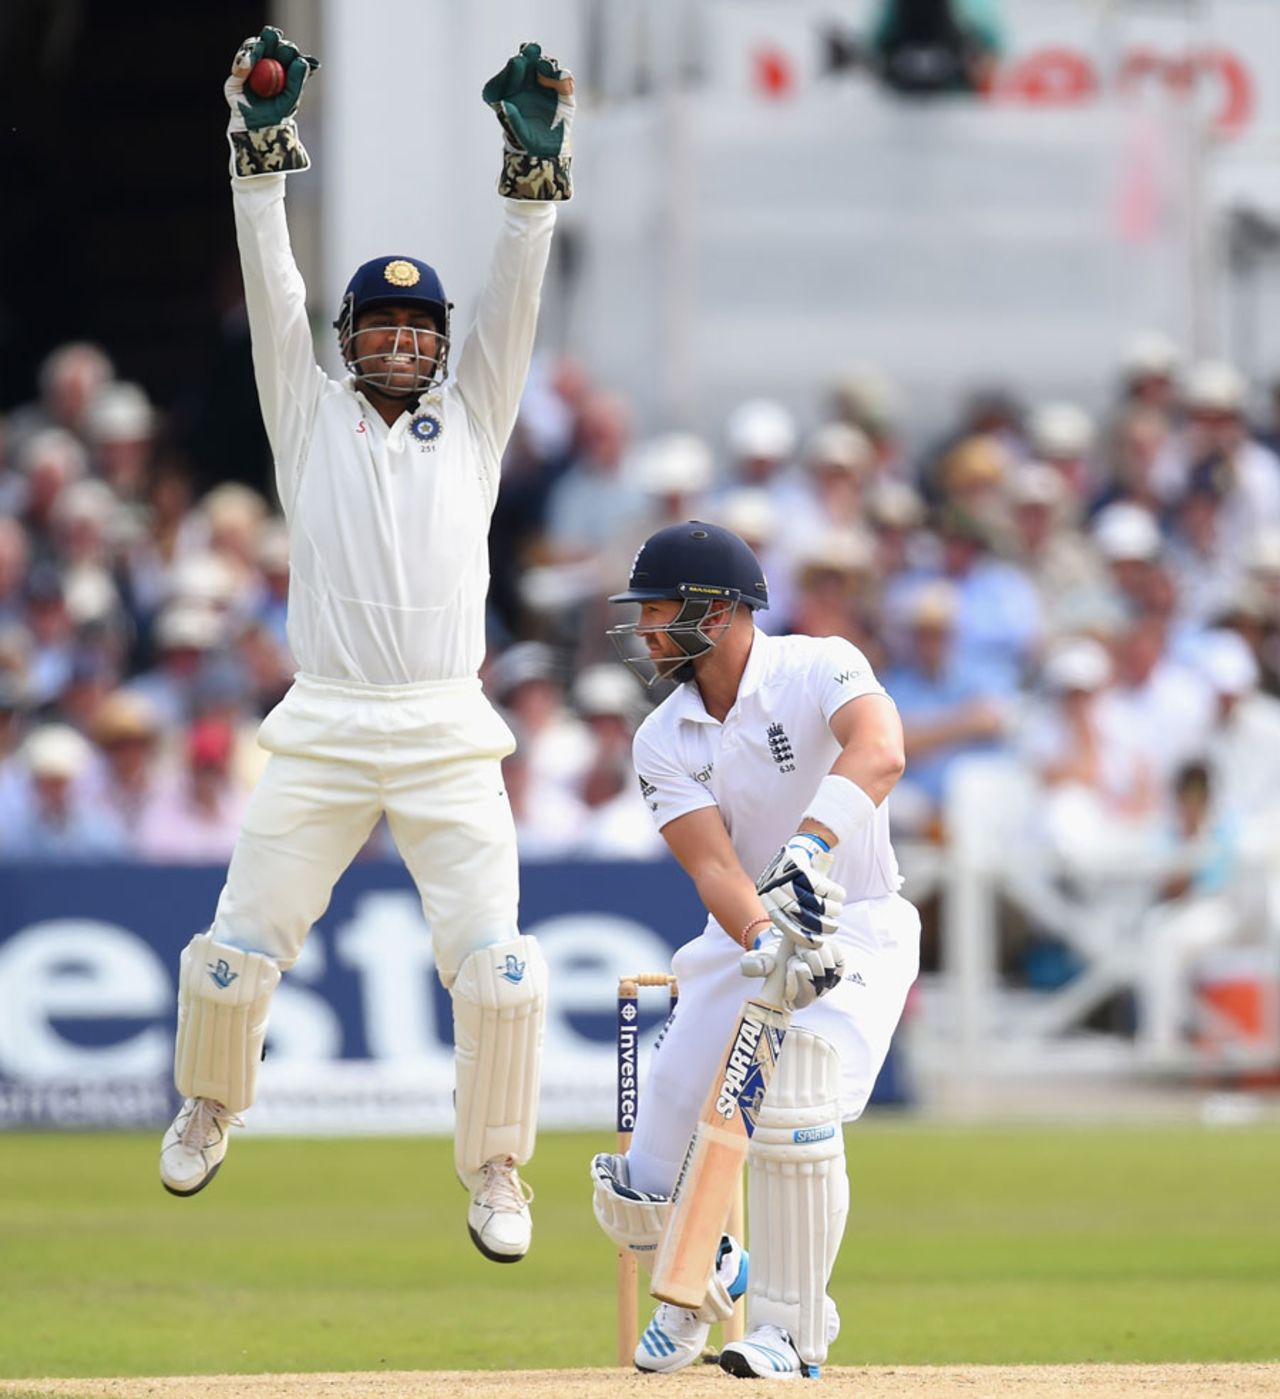 MS Dhoni appeals successfully for the wicket of Matt Prior, England v India, 1st Investec Test, Trent Bridge, 3rd day, July 11, 2014